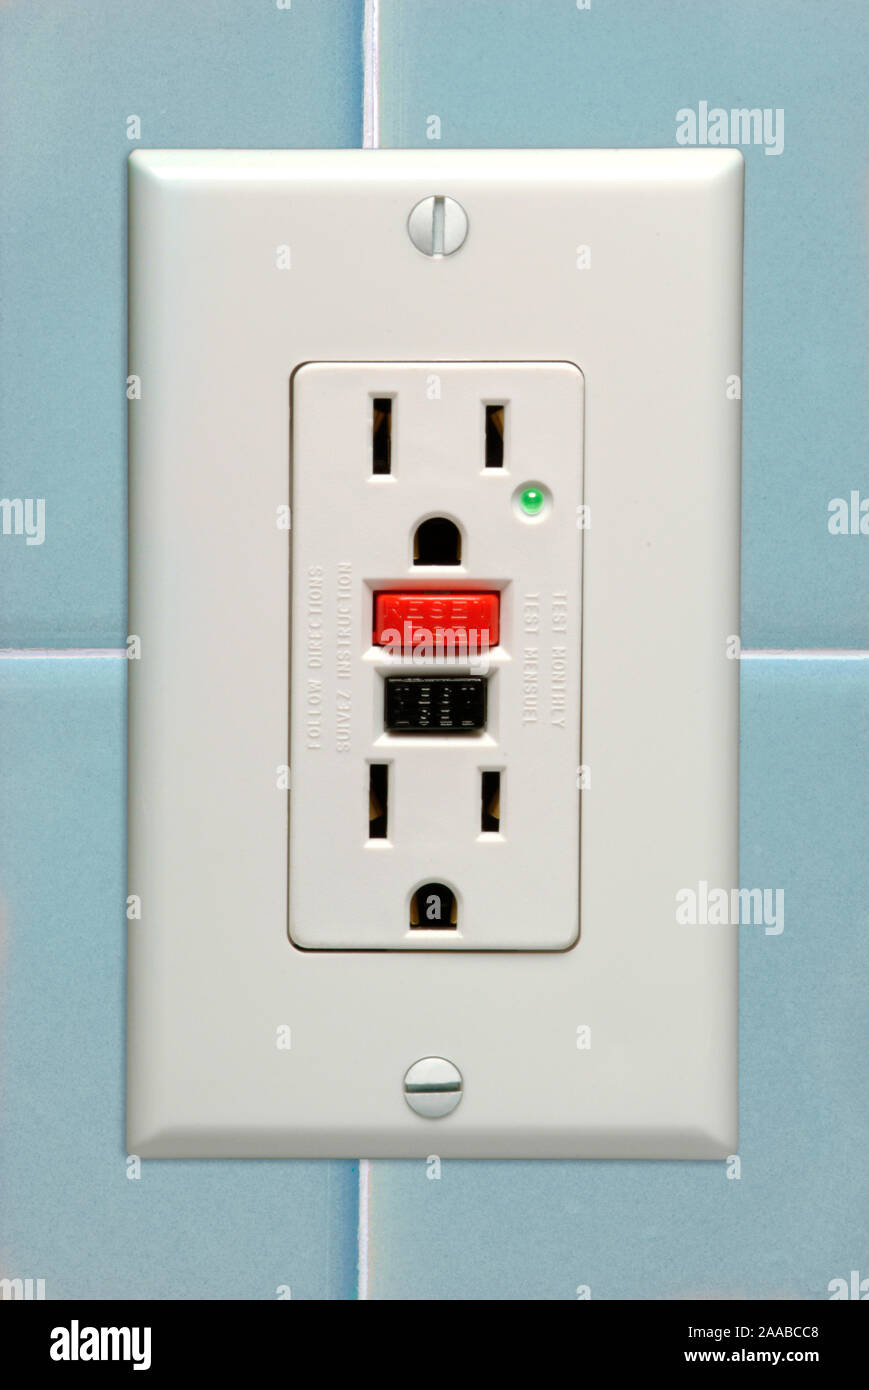 GFCI AC Electrical Wall Socket with Circuit Breaker Stock Photo